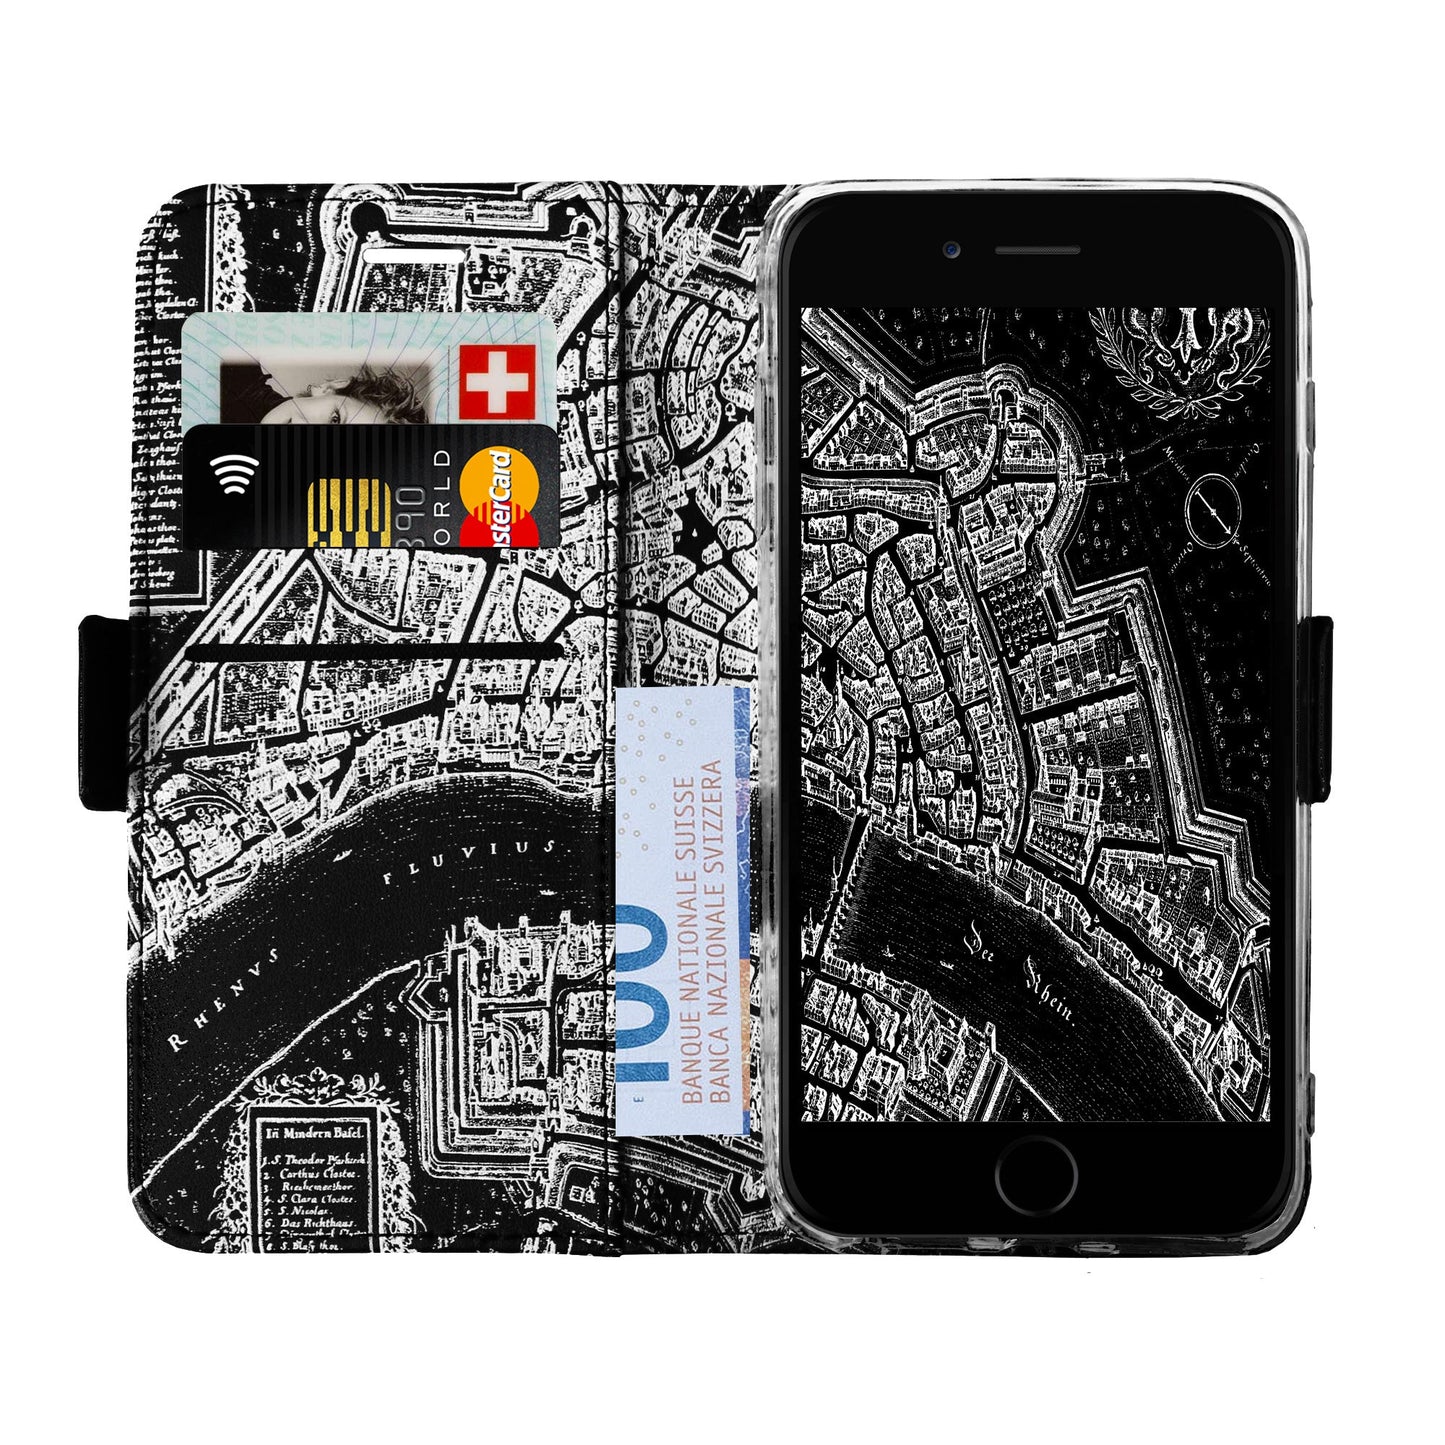 Basel City Spalentor Victor Case for iPhone 6/6S/7/8 Plus